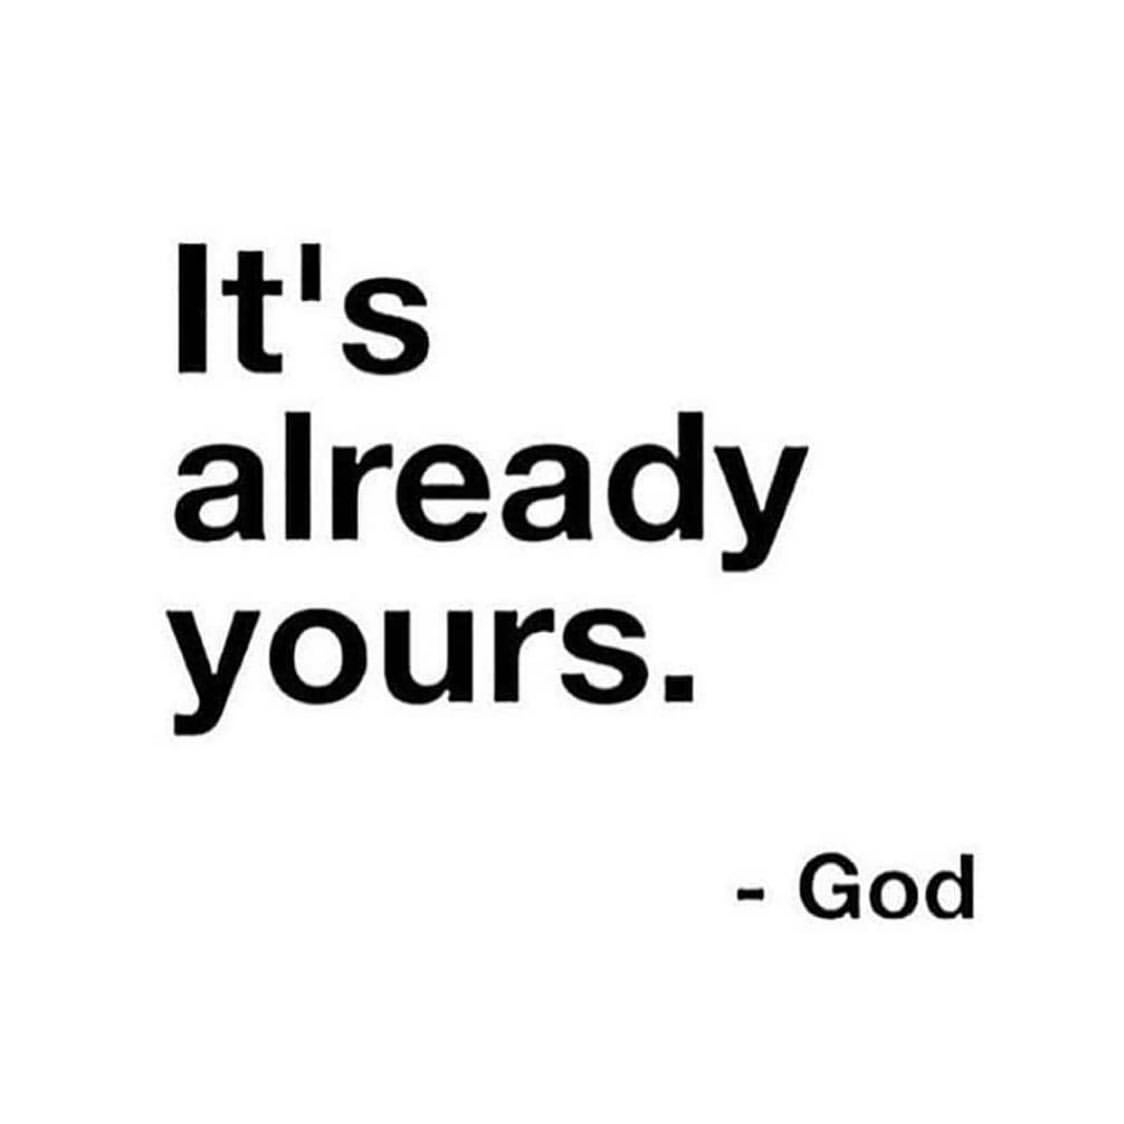 It's already yours. God. - Phrases